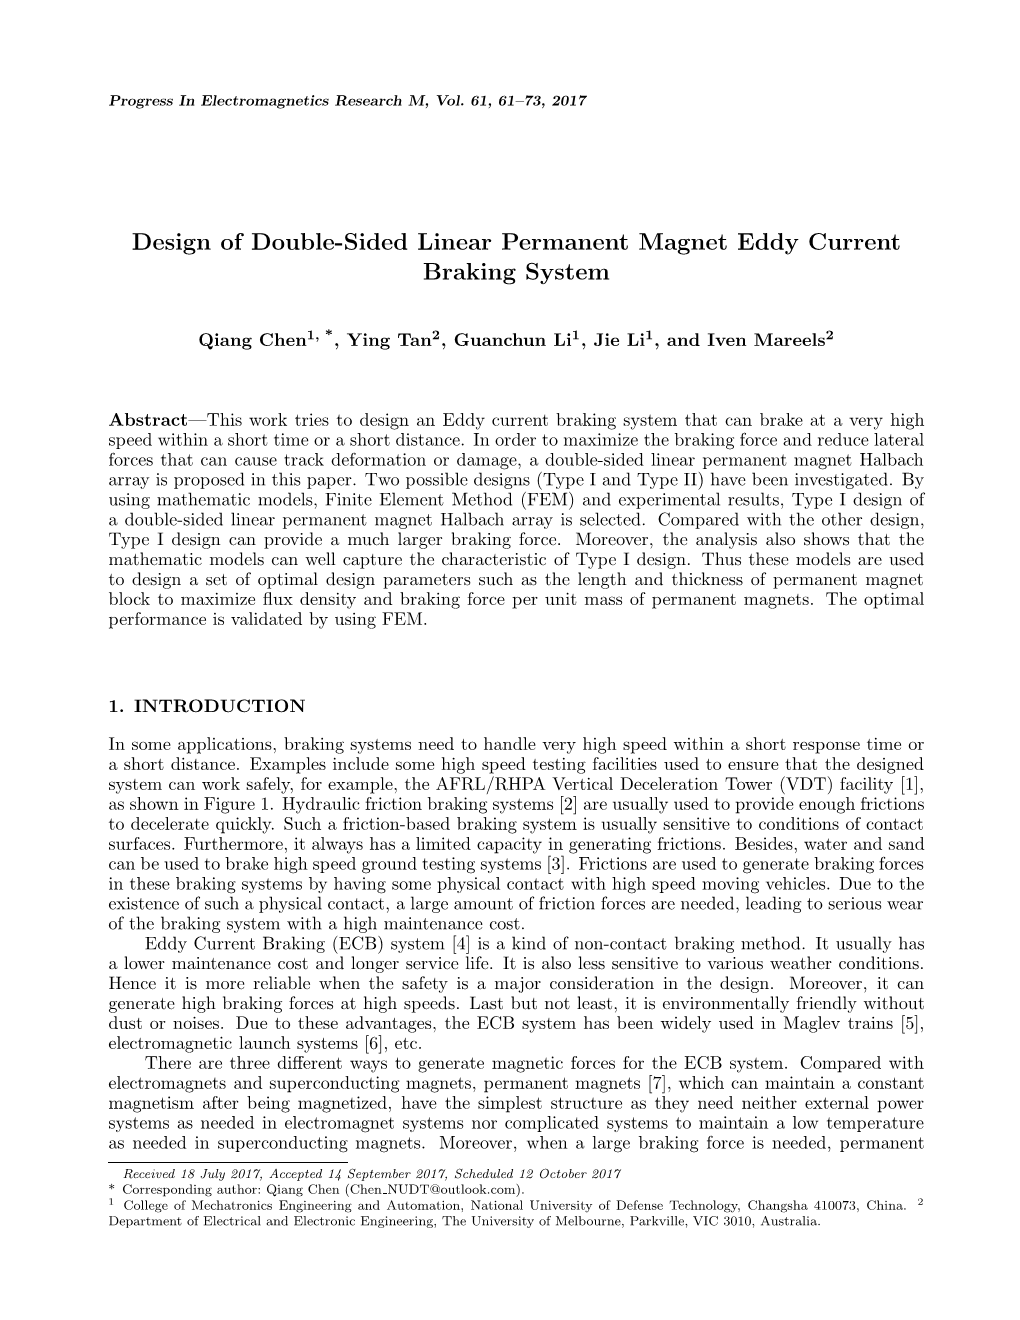 Design of Double-Sided Linear Permanent Magnet Eddy Current Braking System